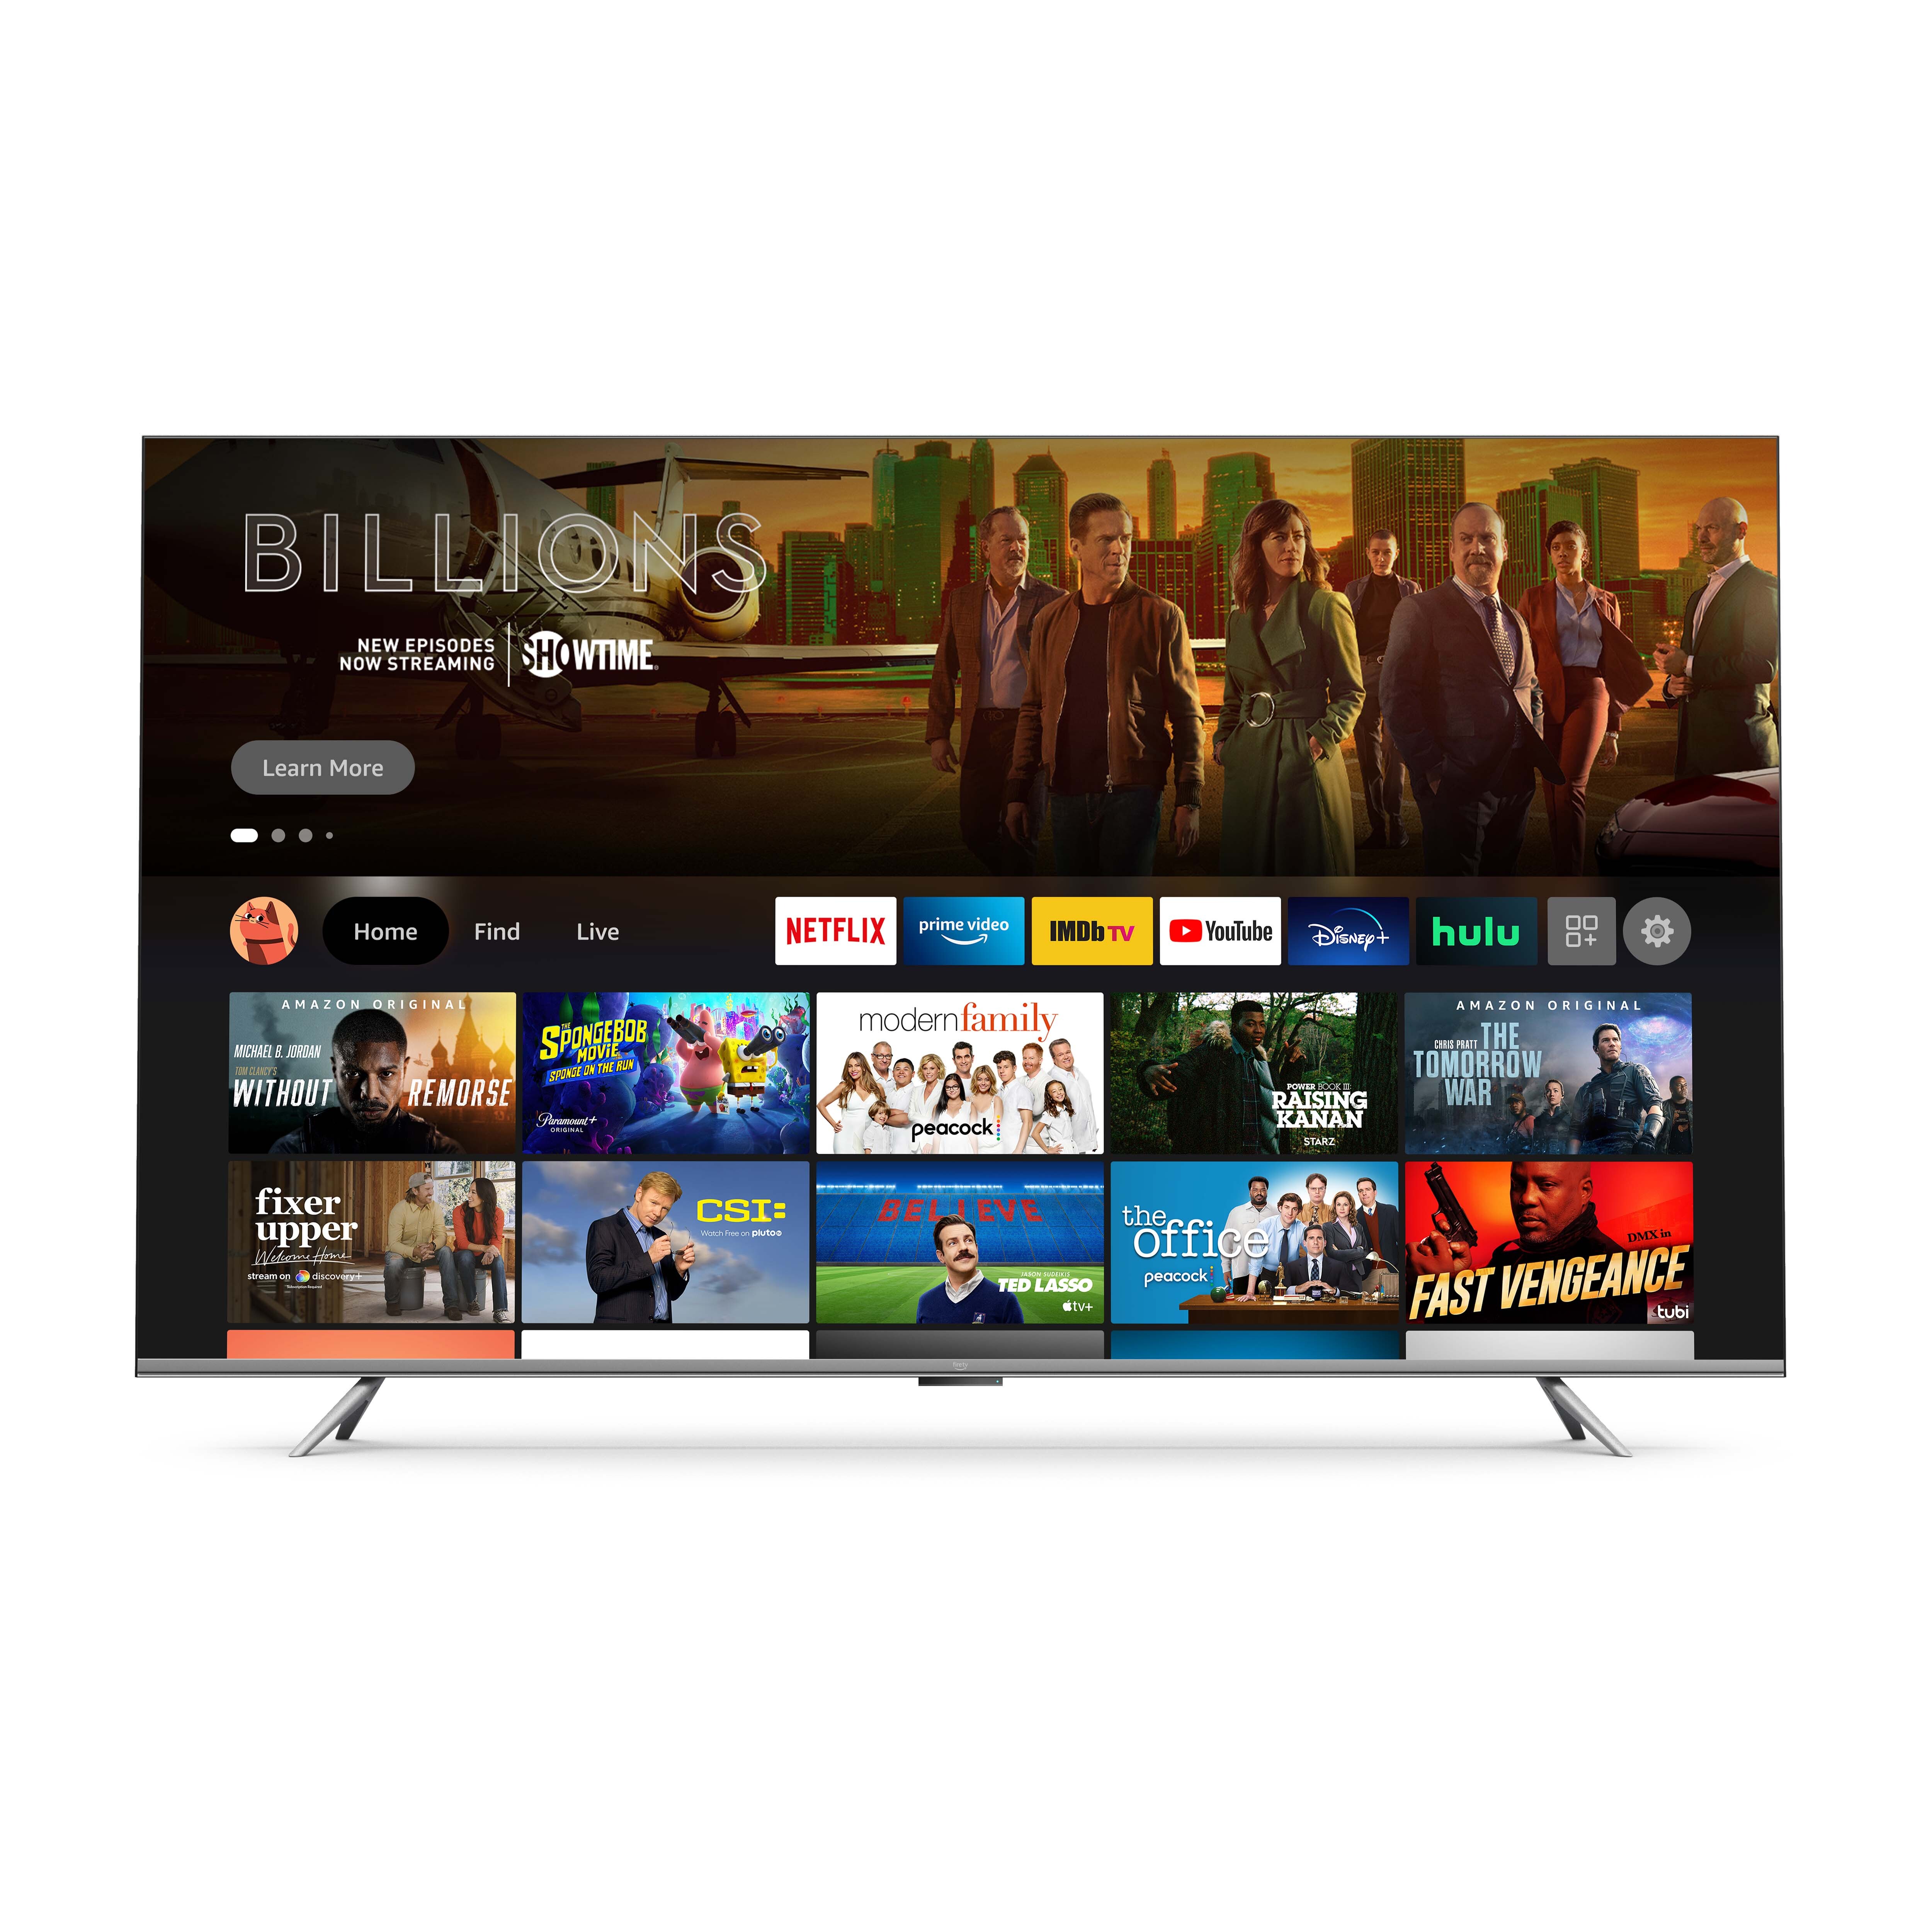 launches its first self-branded smart TVs and a new 4K Fire TV Stick